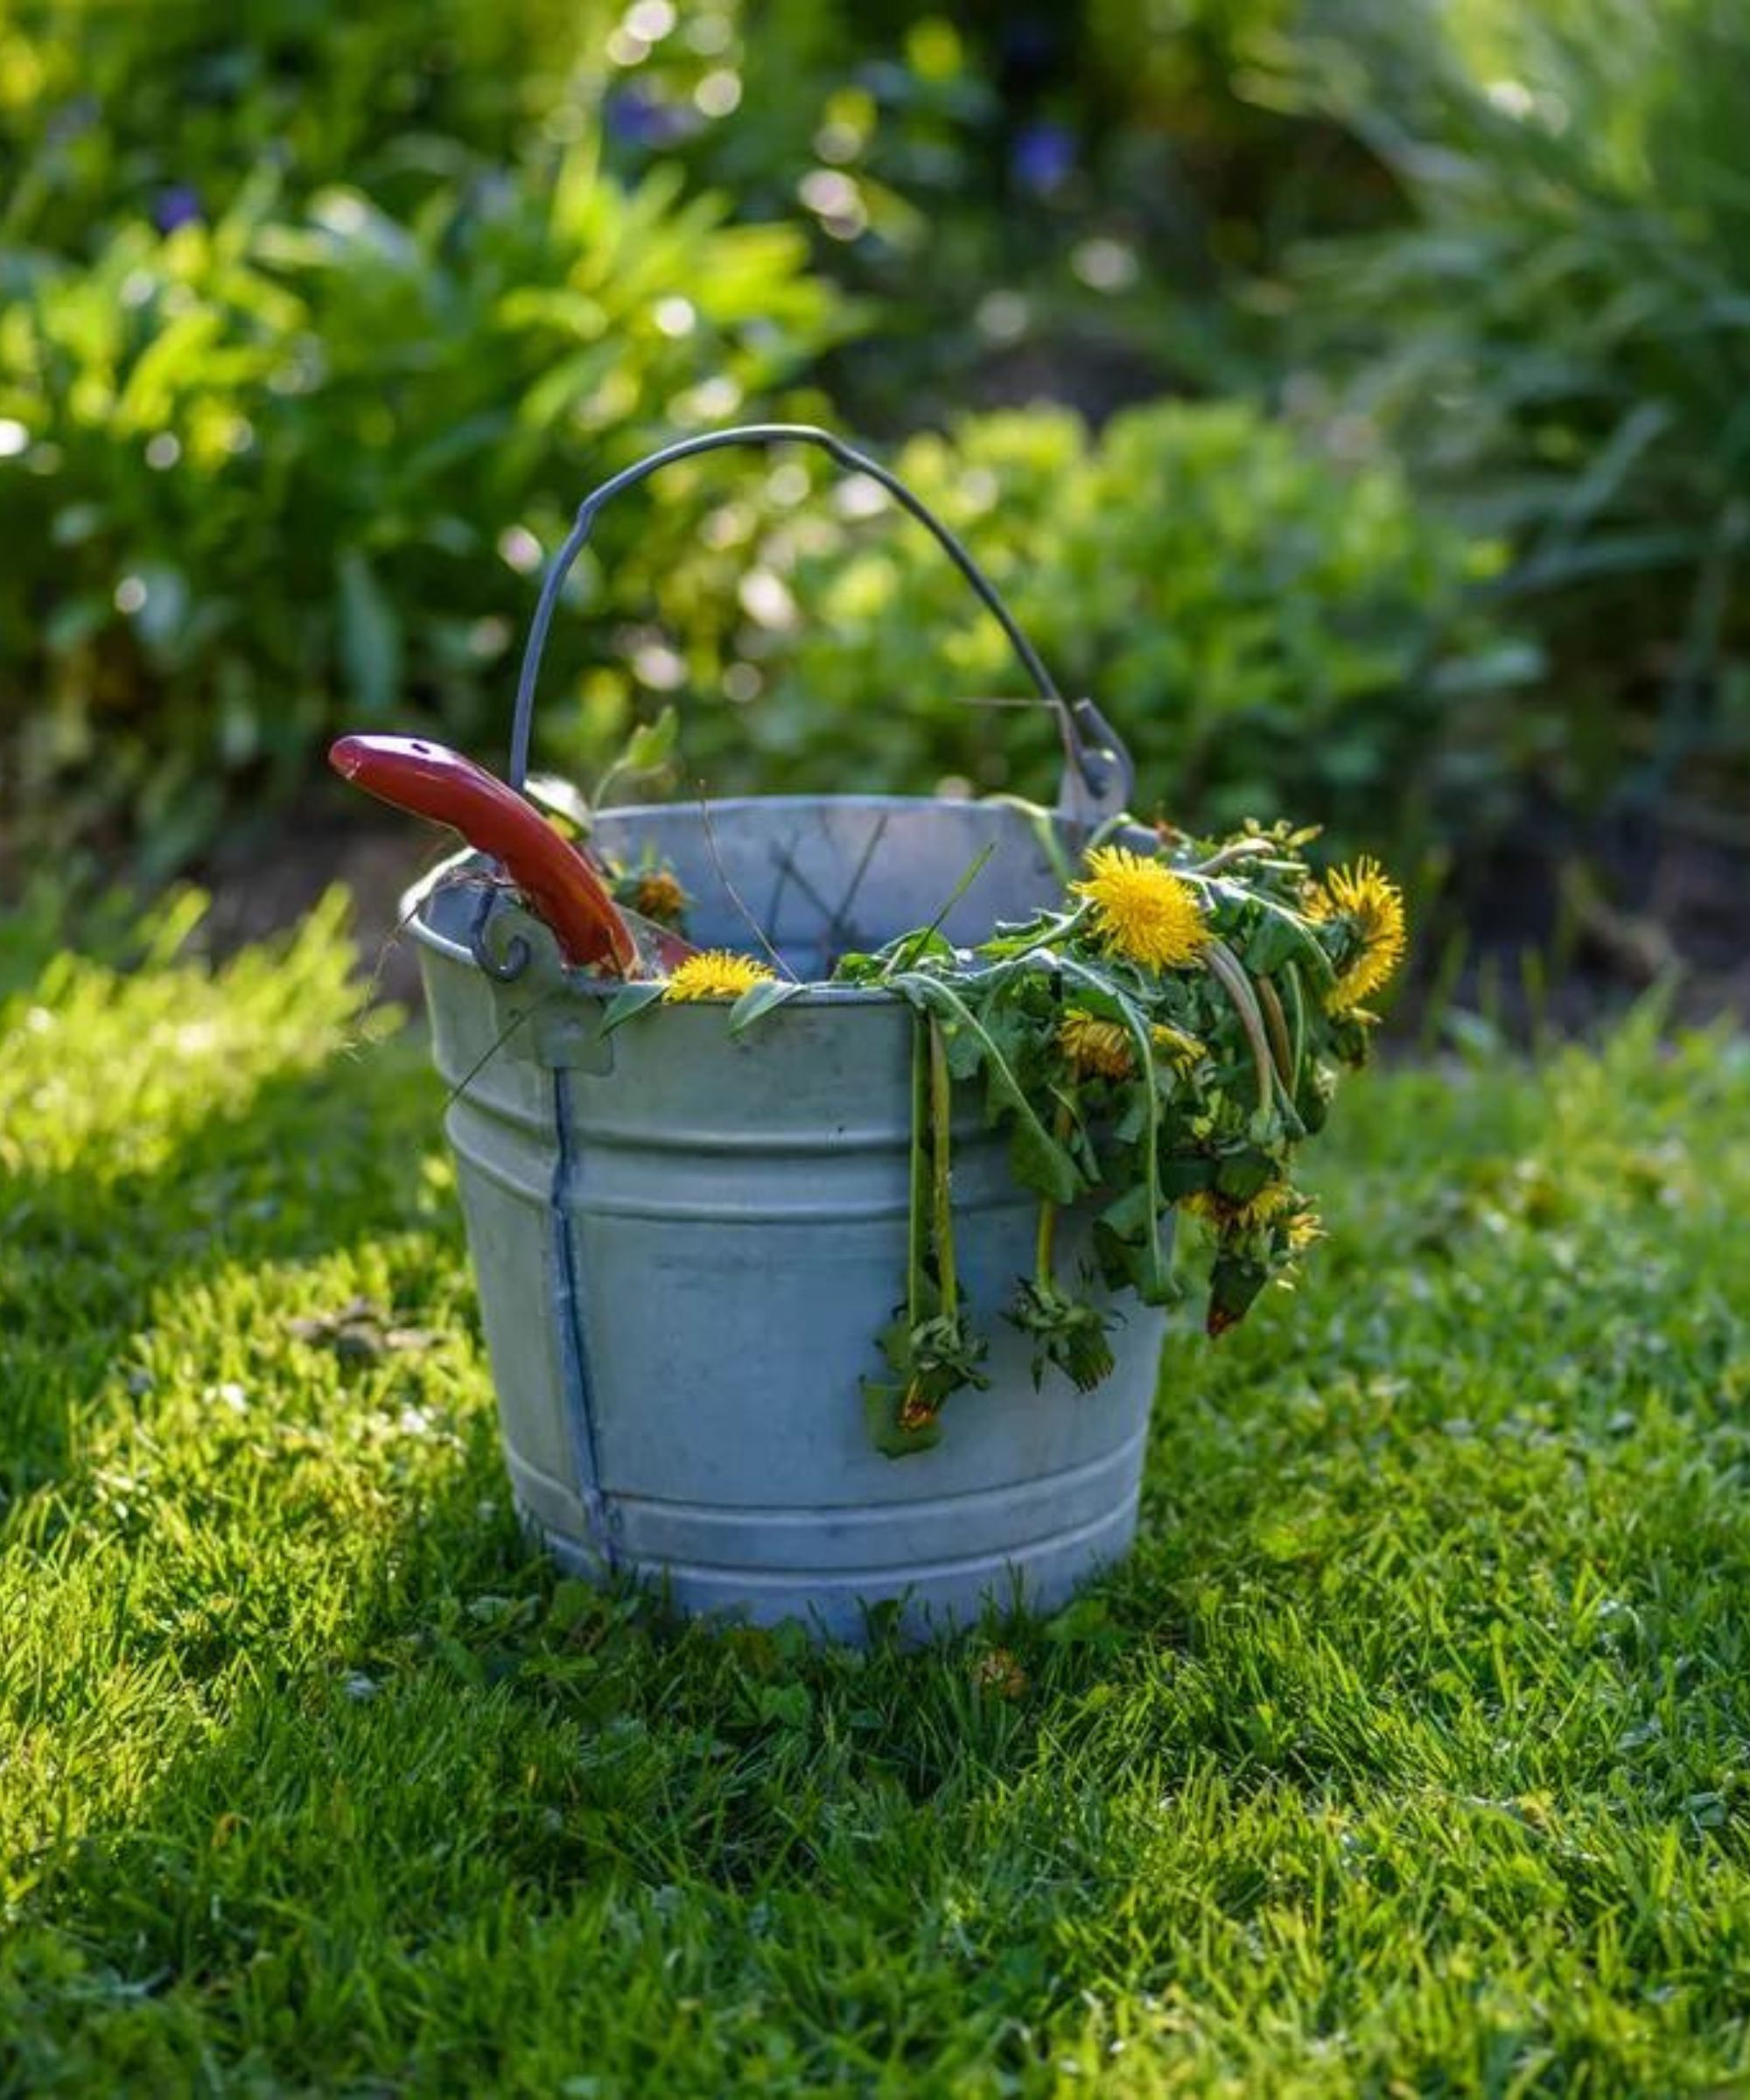 A silver bucket of weeds with yellow dandelions and a red gardening tool inside, sat on a green backyard lawn